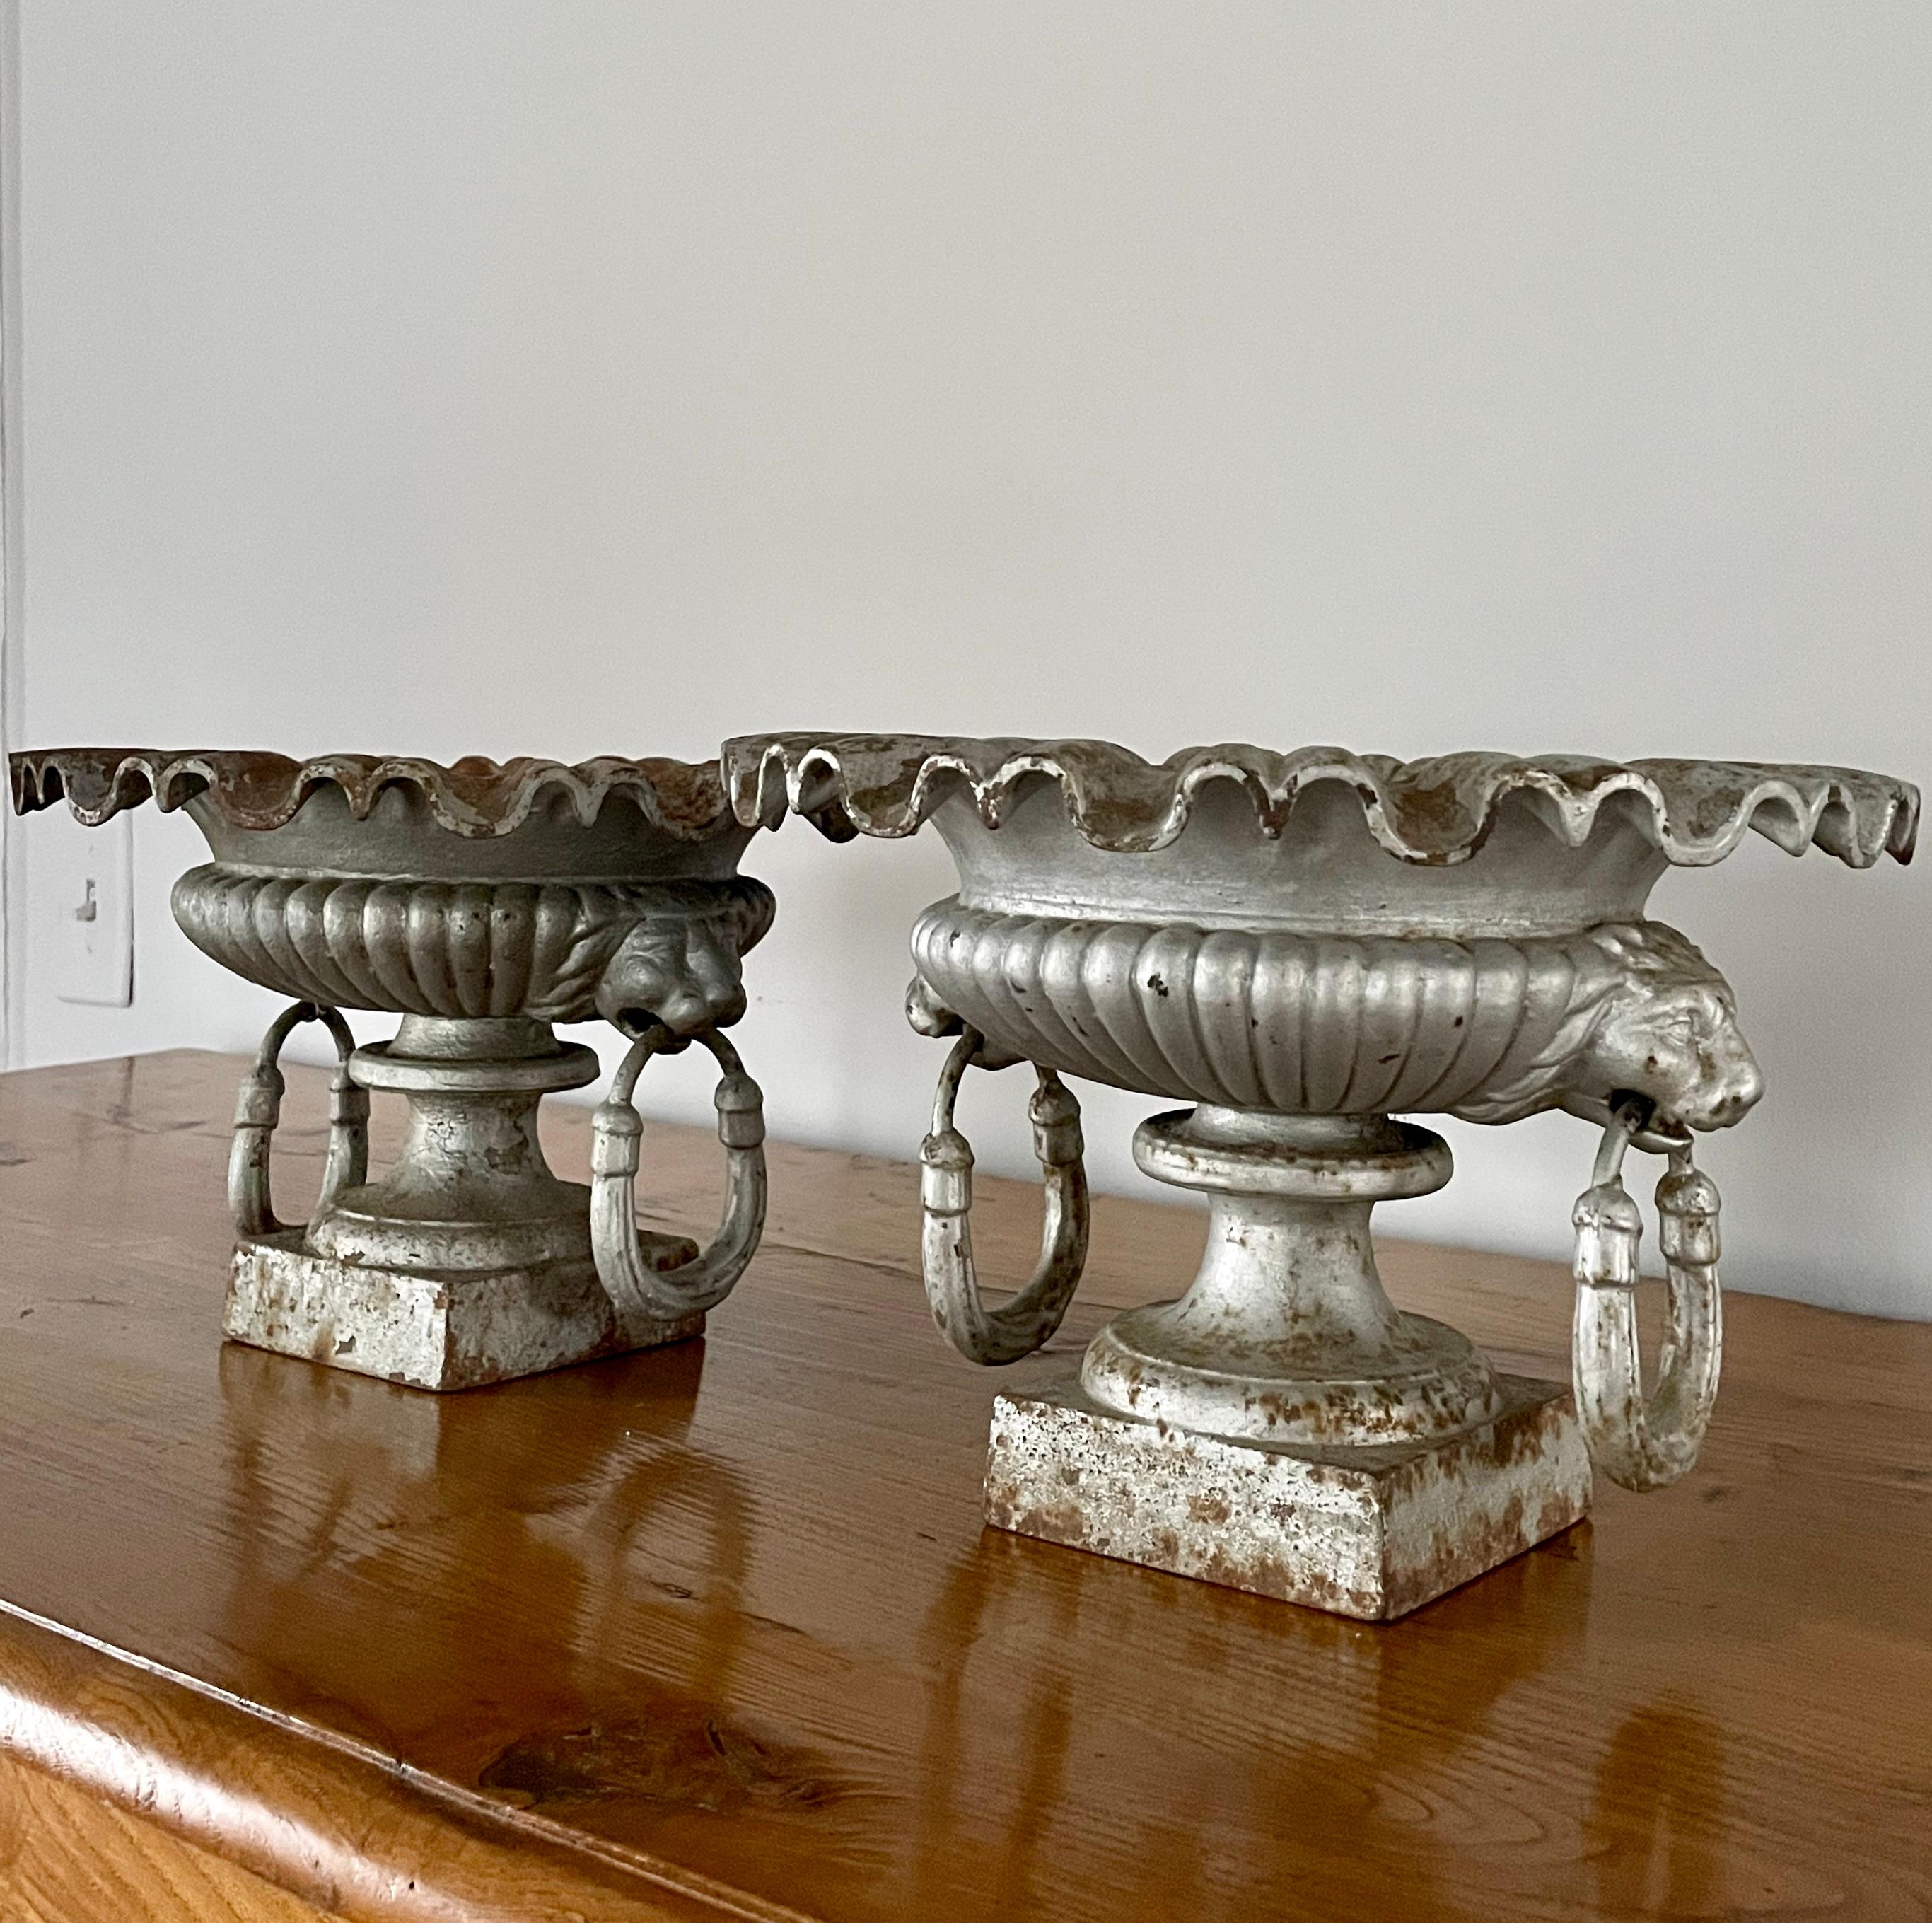 19th Century Rare Pair of Small French 19th C Cast Iron Urns with Lion Heads and Ruffled Rims For Sale